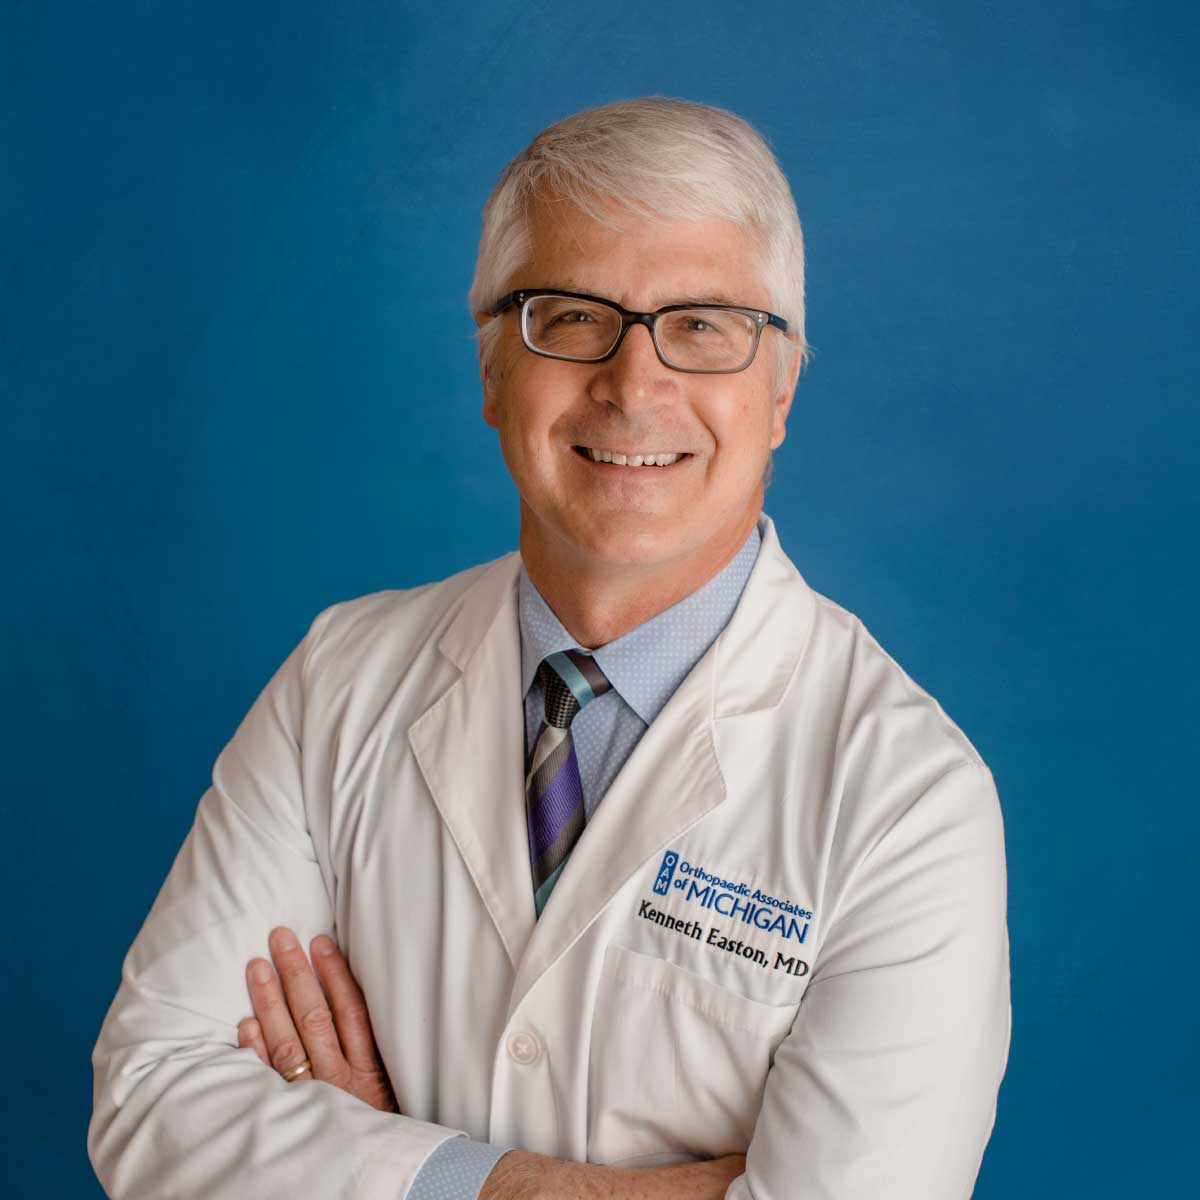 Kenneth Easton, MD - Orthopedic Surgeons in Greater Grand Rapids, MI